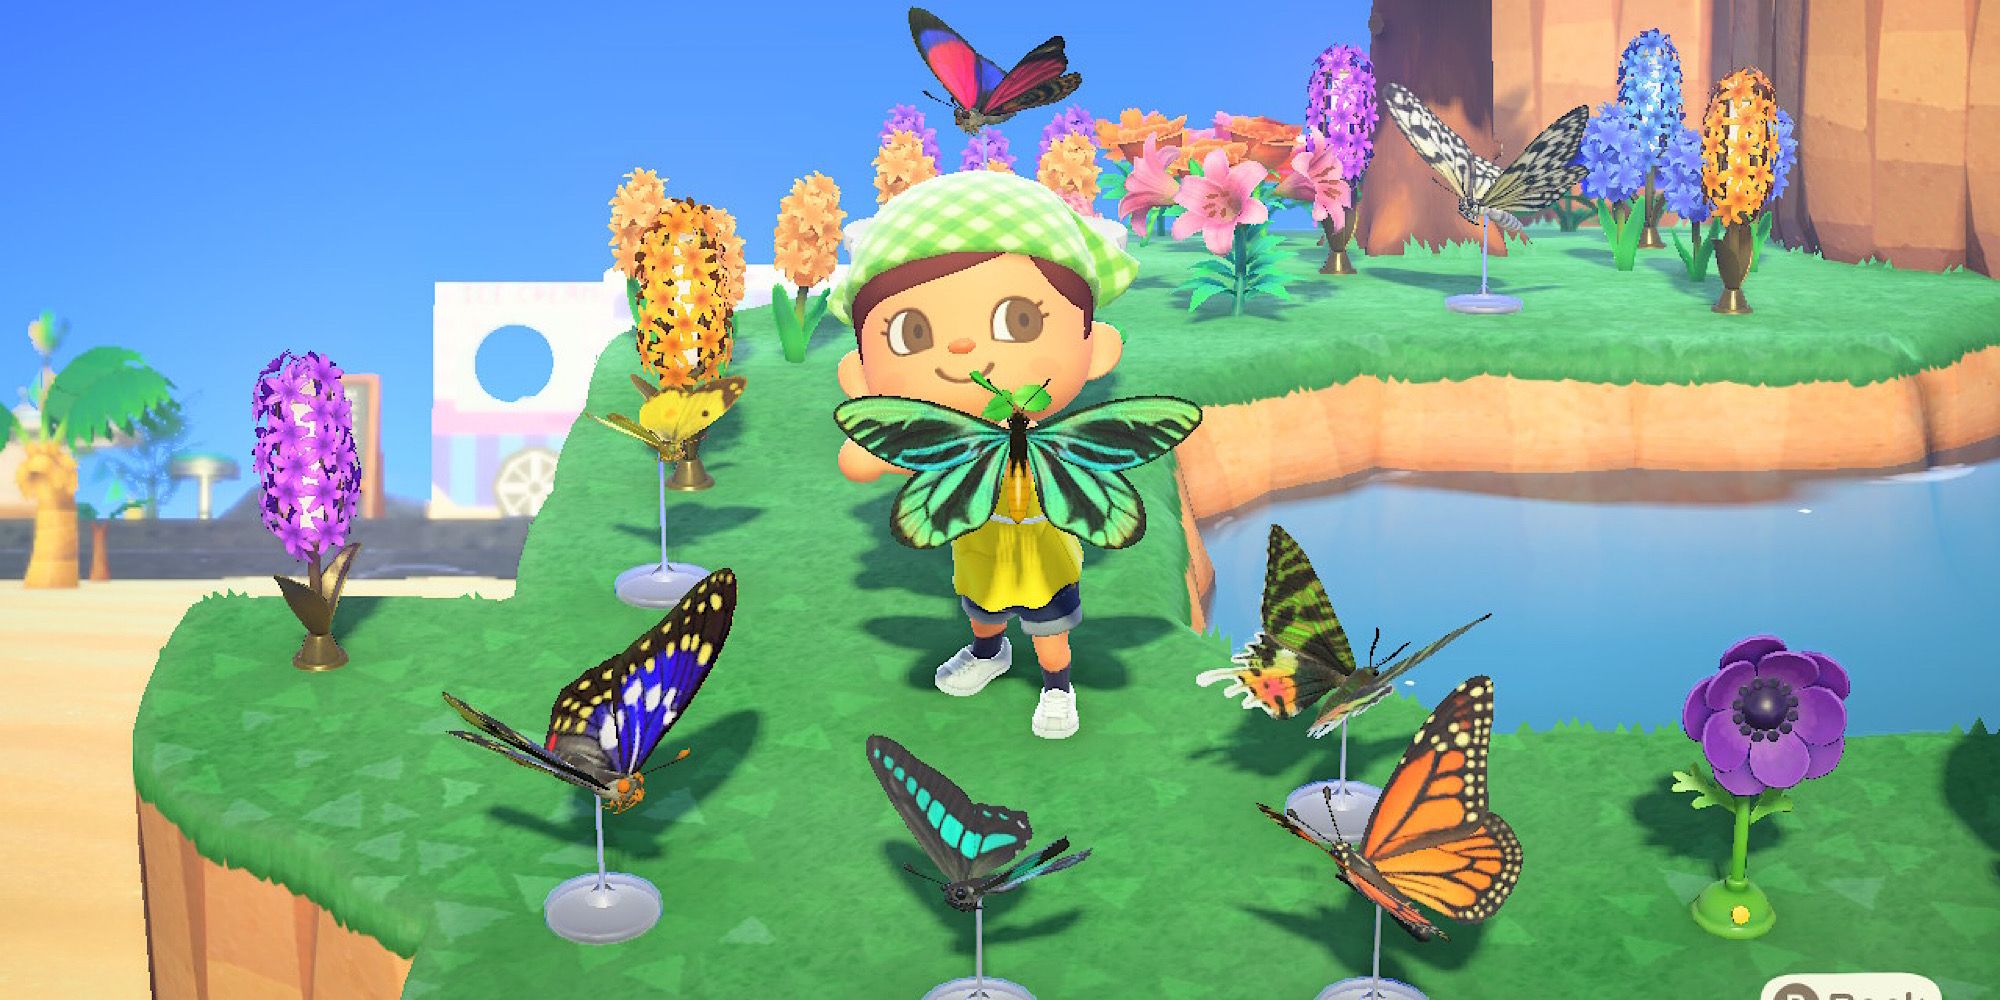 What Bugs In Animal Crossing New Horizons Are Worth The Most